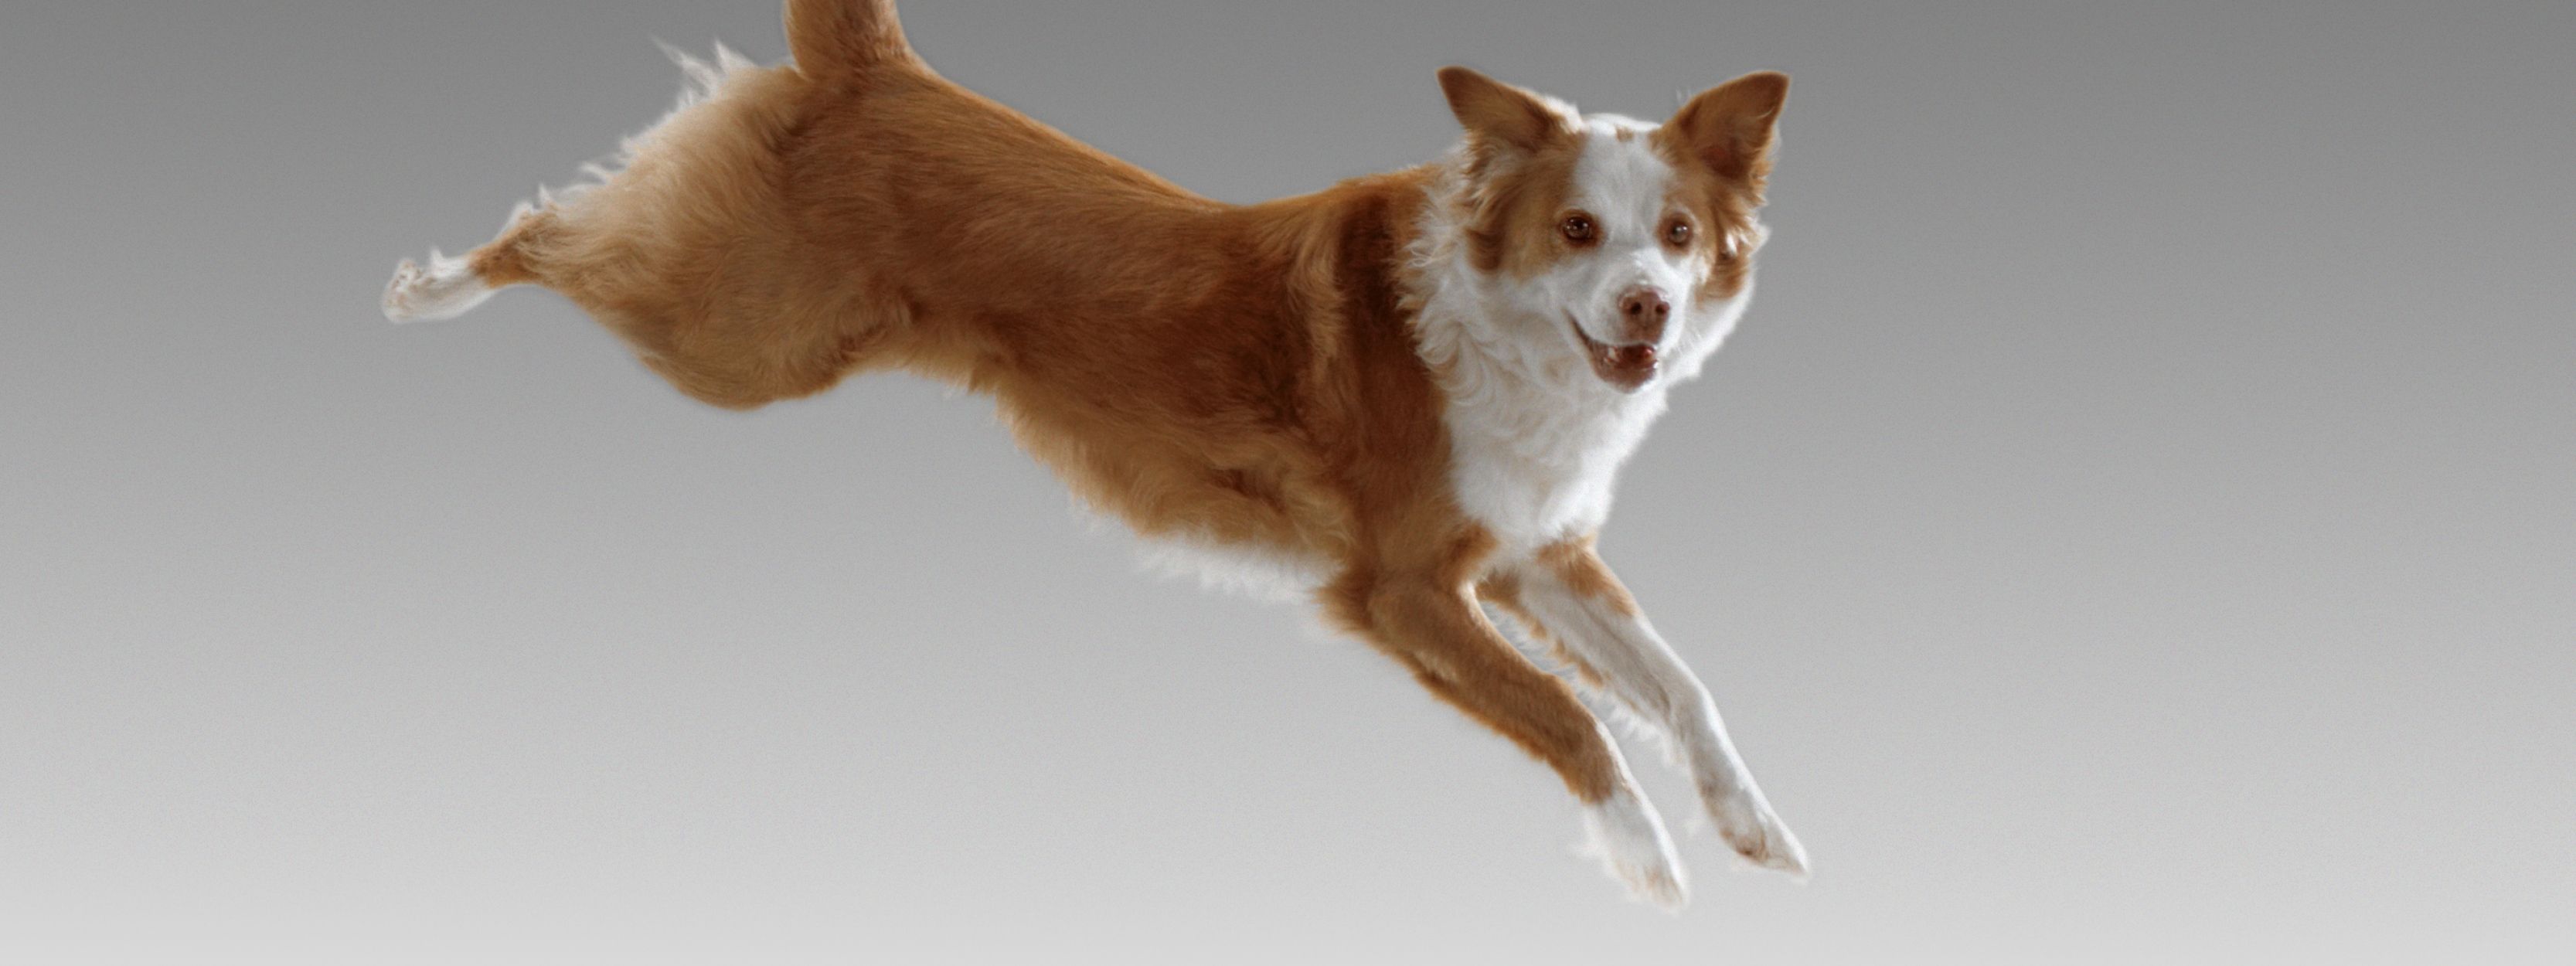 A dog doing a large jump